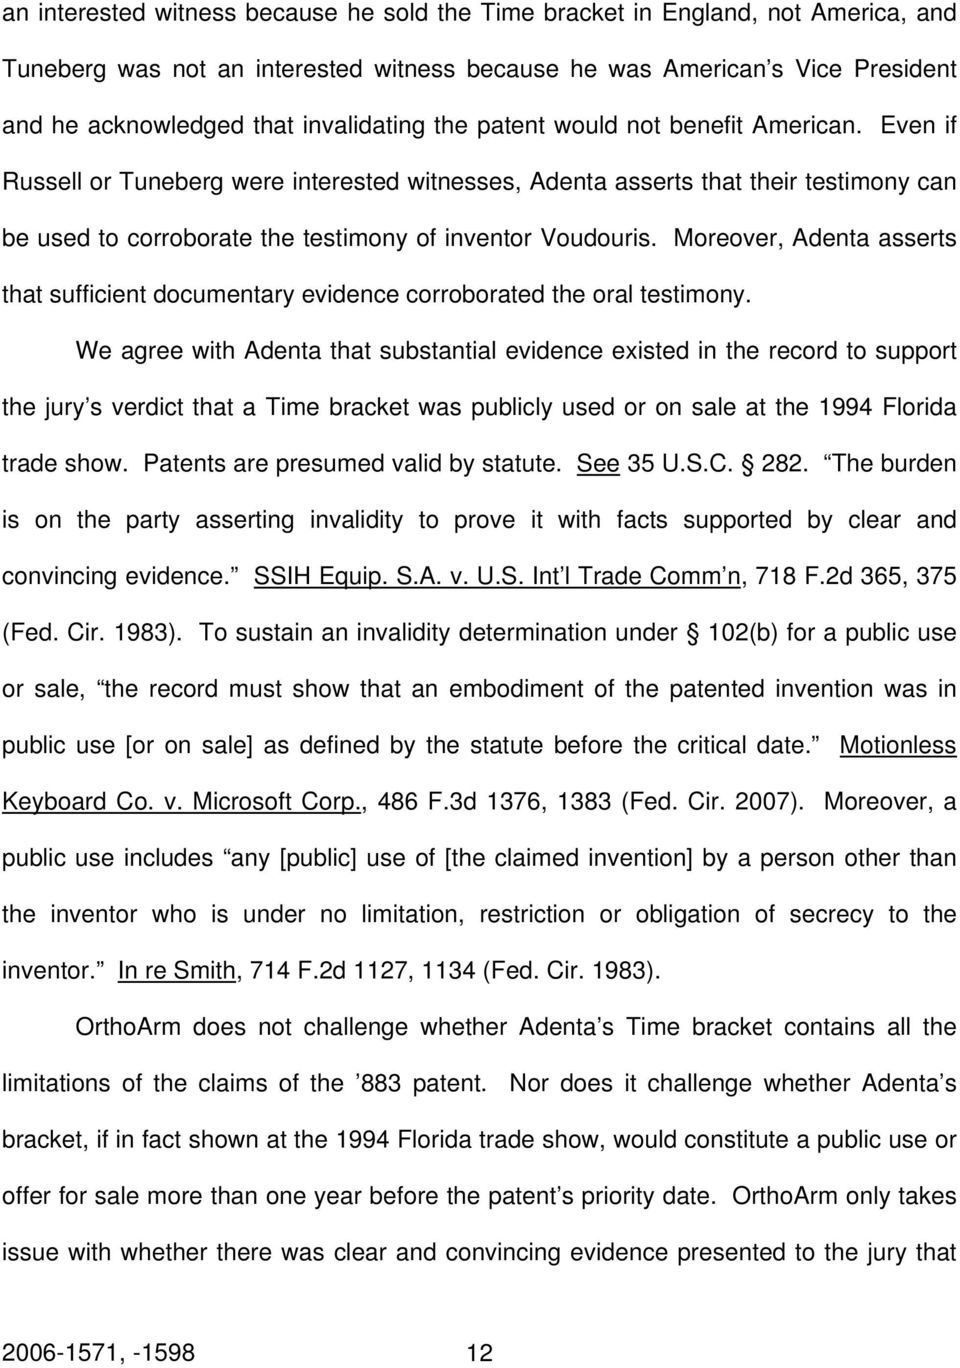 Even if Russell or Tuneberg were interested witnesses, Adenta asserts that their testimony can be used to corroborate the testimony of inventor Voudouris.